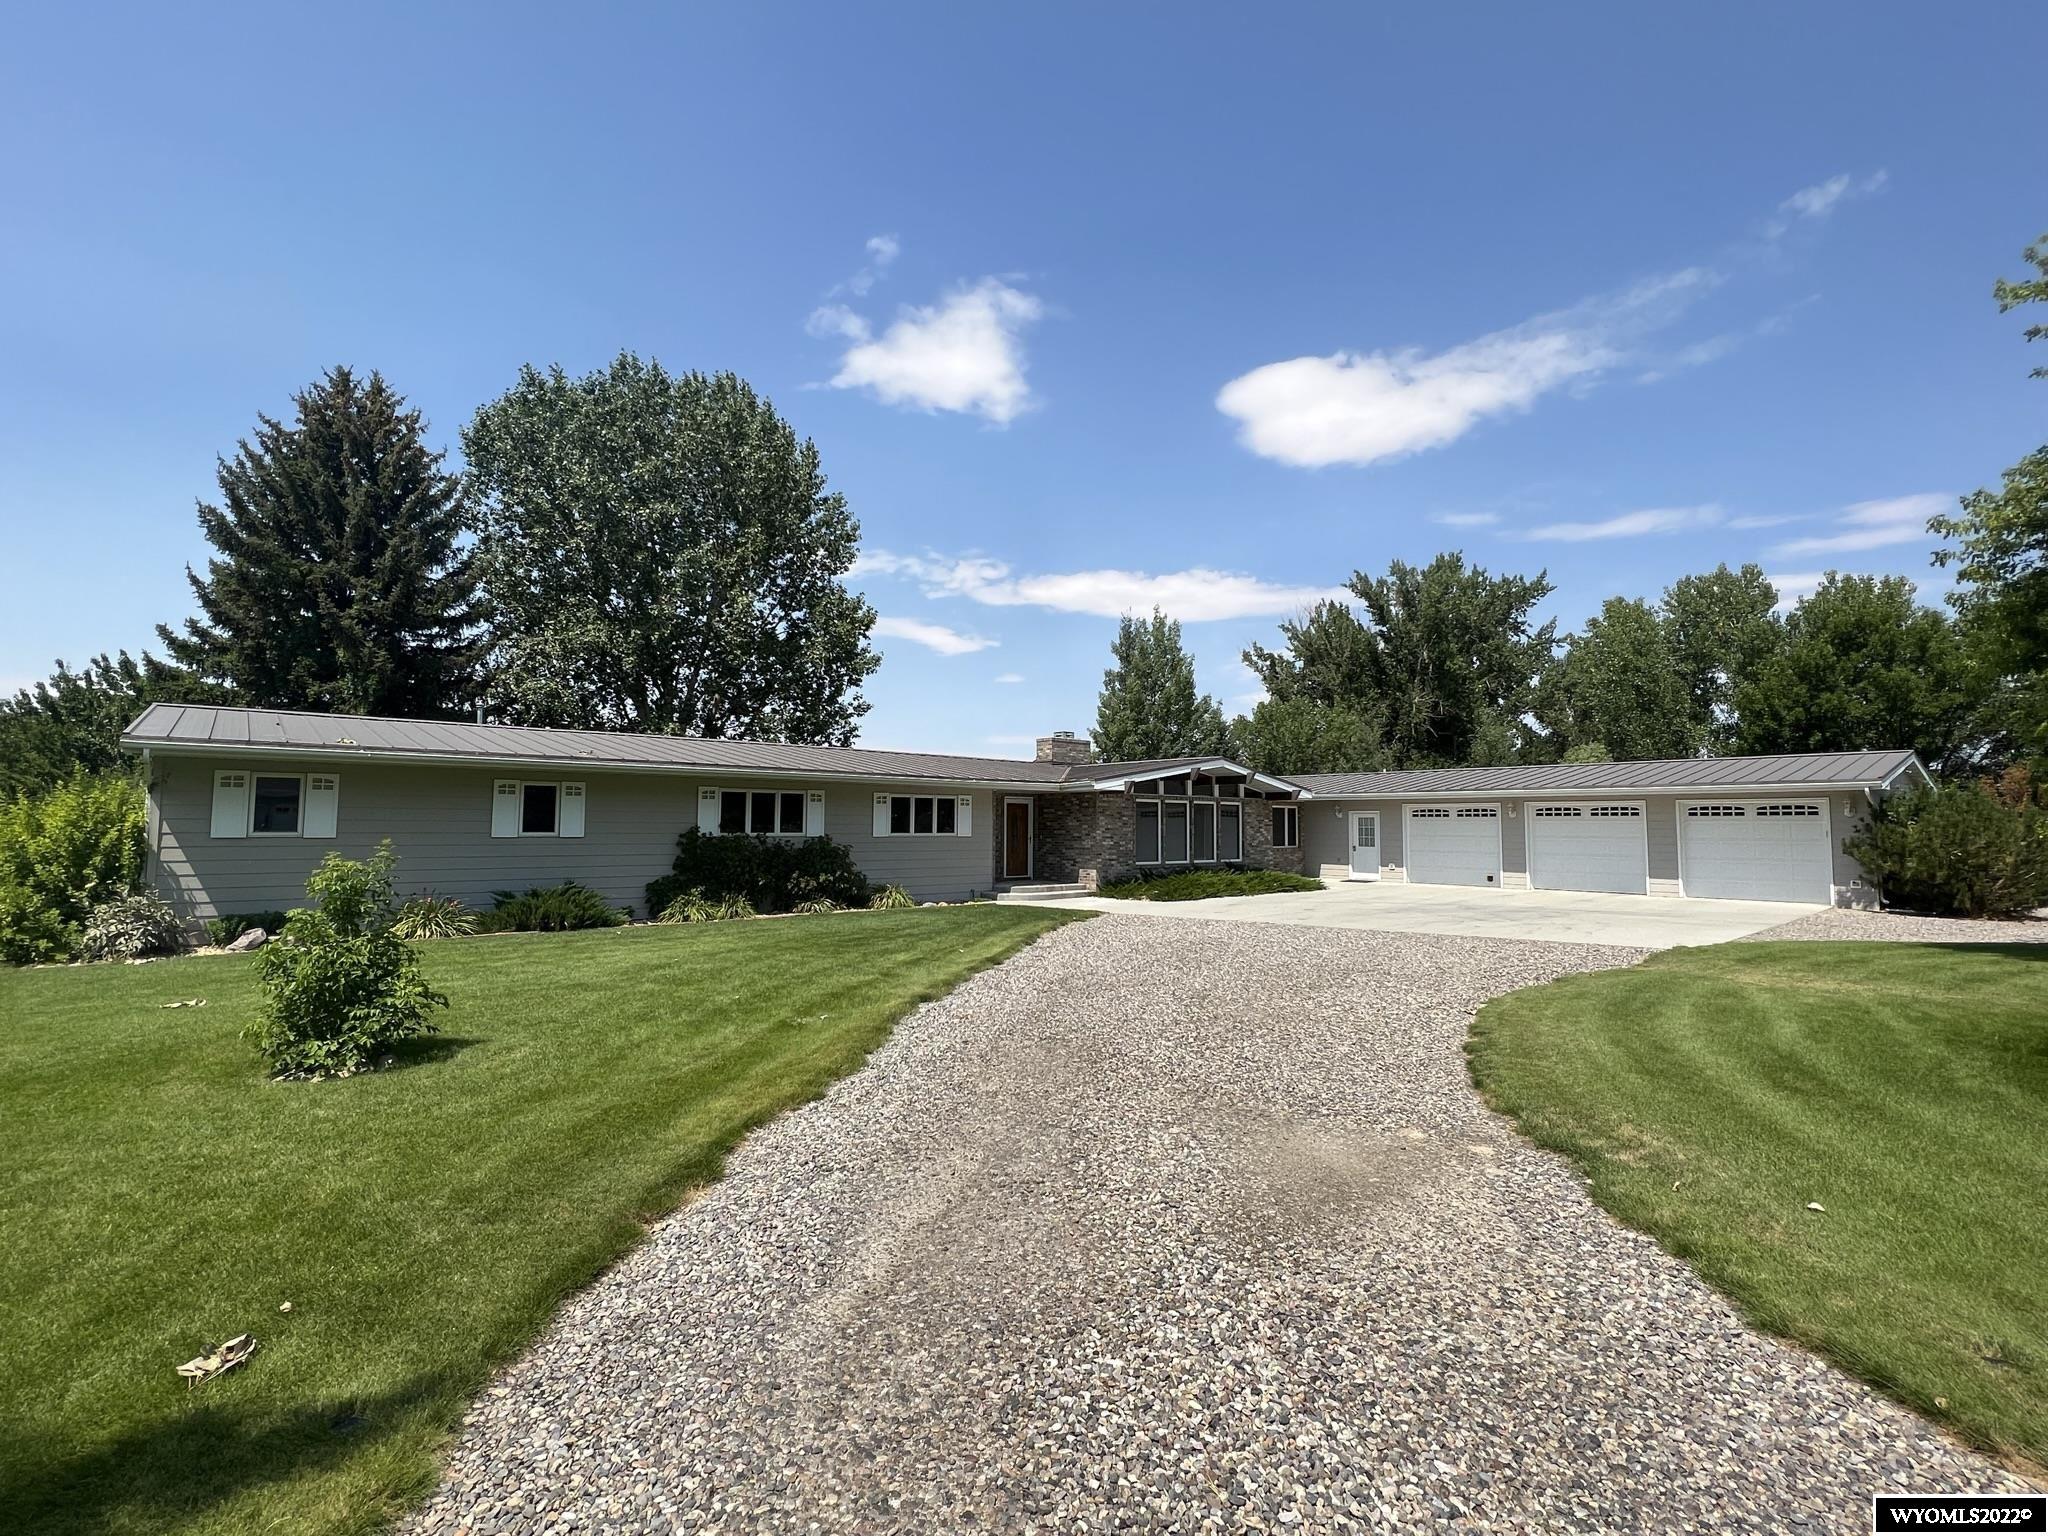 Amazing home on 1.62 acres right outside of Worland!  This spacious ranch has been meticulously maintained by the same owners for many years.  Home includes two master suites - one with huge 13'8" x 7'8" walk-in closet, jetted tub and walk-in shower.  Second has full bath and plentiful closet space.  Enjoy the beautiful views from the family room, kitchen, master bath, and den.  Living and dining rooms boast tongue and groove ceilings, and decorative wood beams flow throughout the main living spaces. This property continues to wow when you walk outside to the expansive grounds that have been carefully manicured to include beautiful mature trees and perennial plants.  The yard is irrigated from the Lower Hanover Canal by way of a recently updated pump.  The back patio is a perfect spot to sit and watch the sunset in the shade under the automatic awning.  Storage building perfectly matches main house and has a concrete floor, wall heater, and dog kennel.